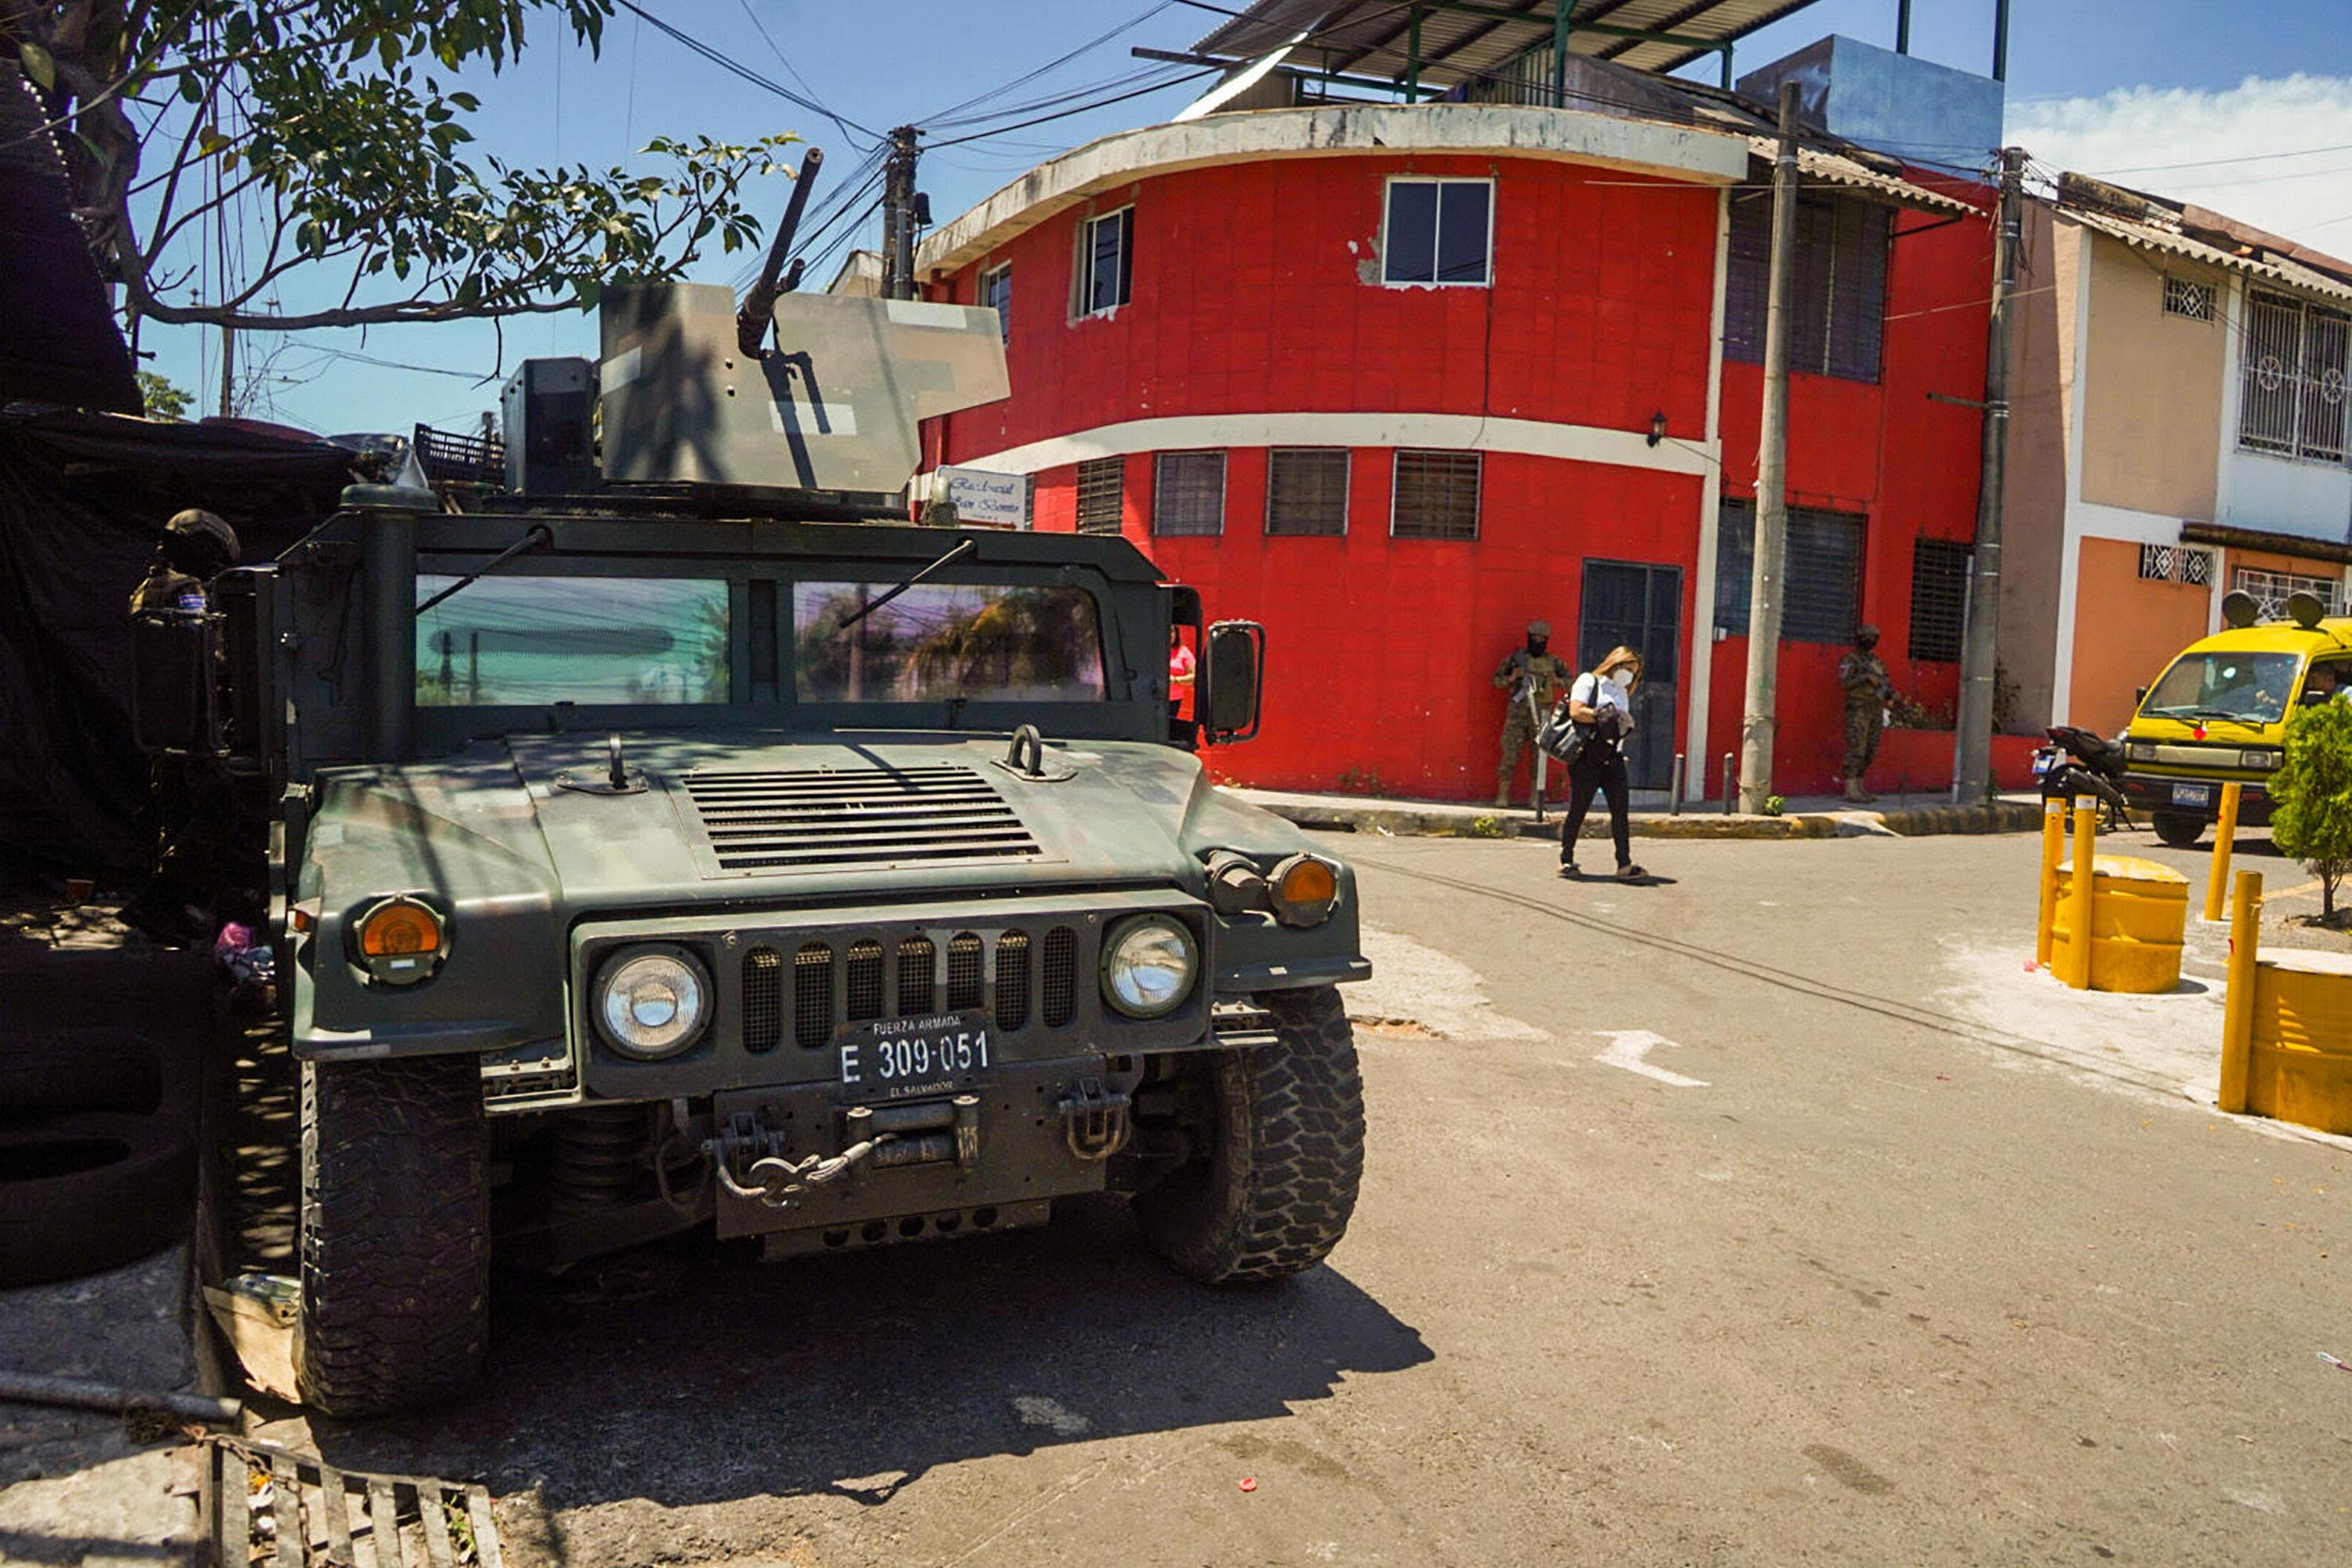 In Las Palmas, San Salvador, the Armed Forces set up a checkpoint to register those coming into the community and detain local gang members after the Legislative Assembly approved a 30-day state of exception in the early hours of March 27. Photo: Carlos Barrera/El Faro